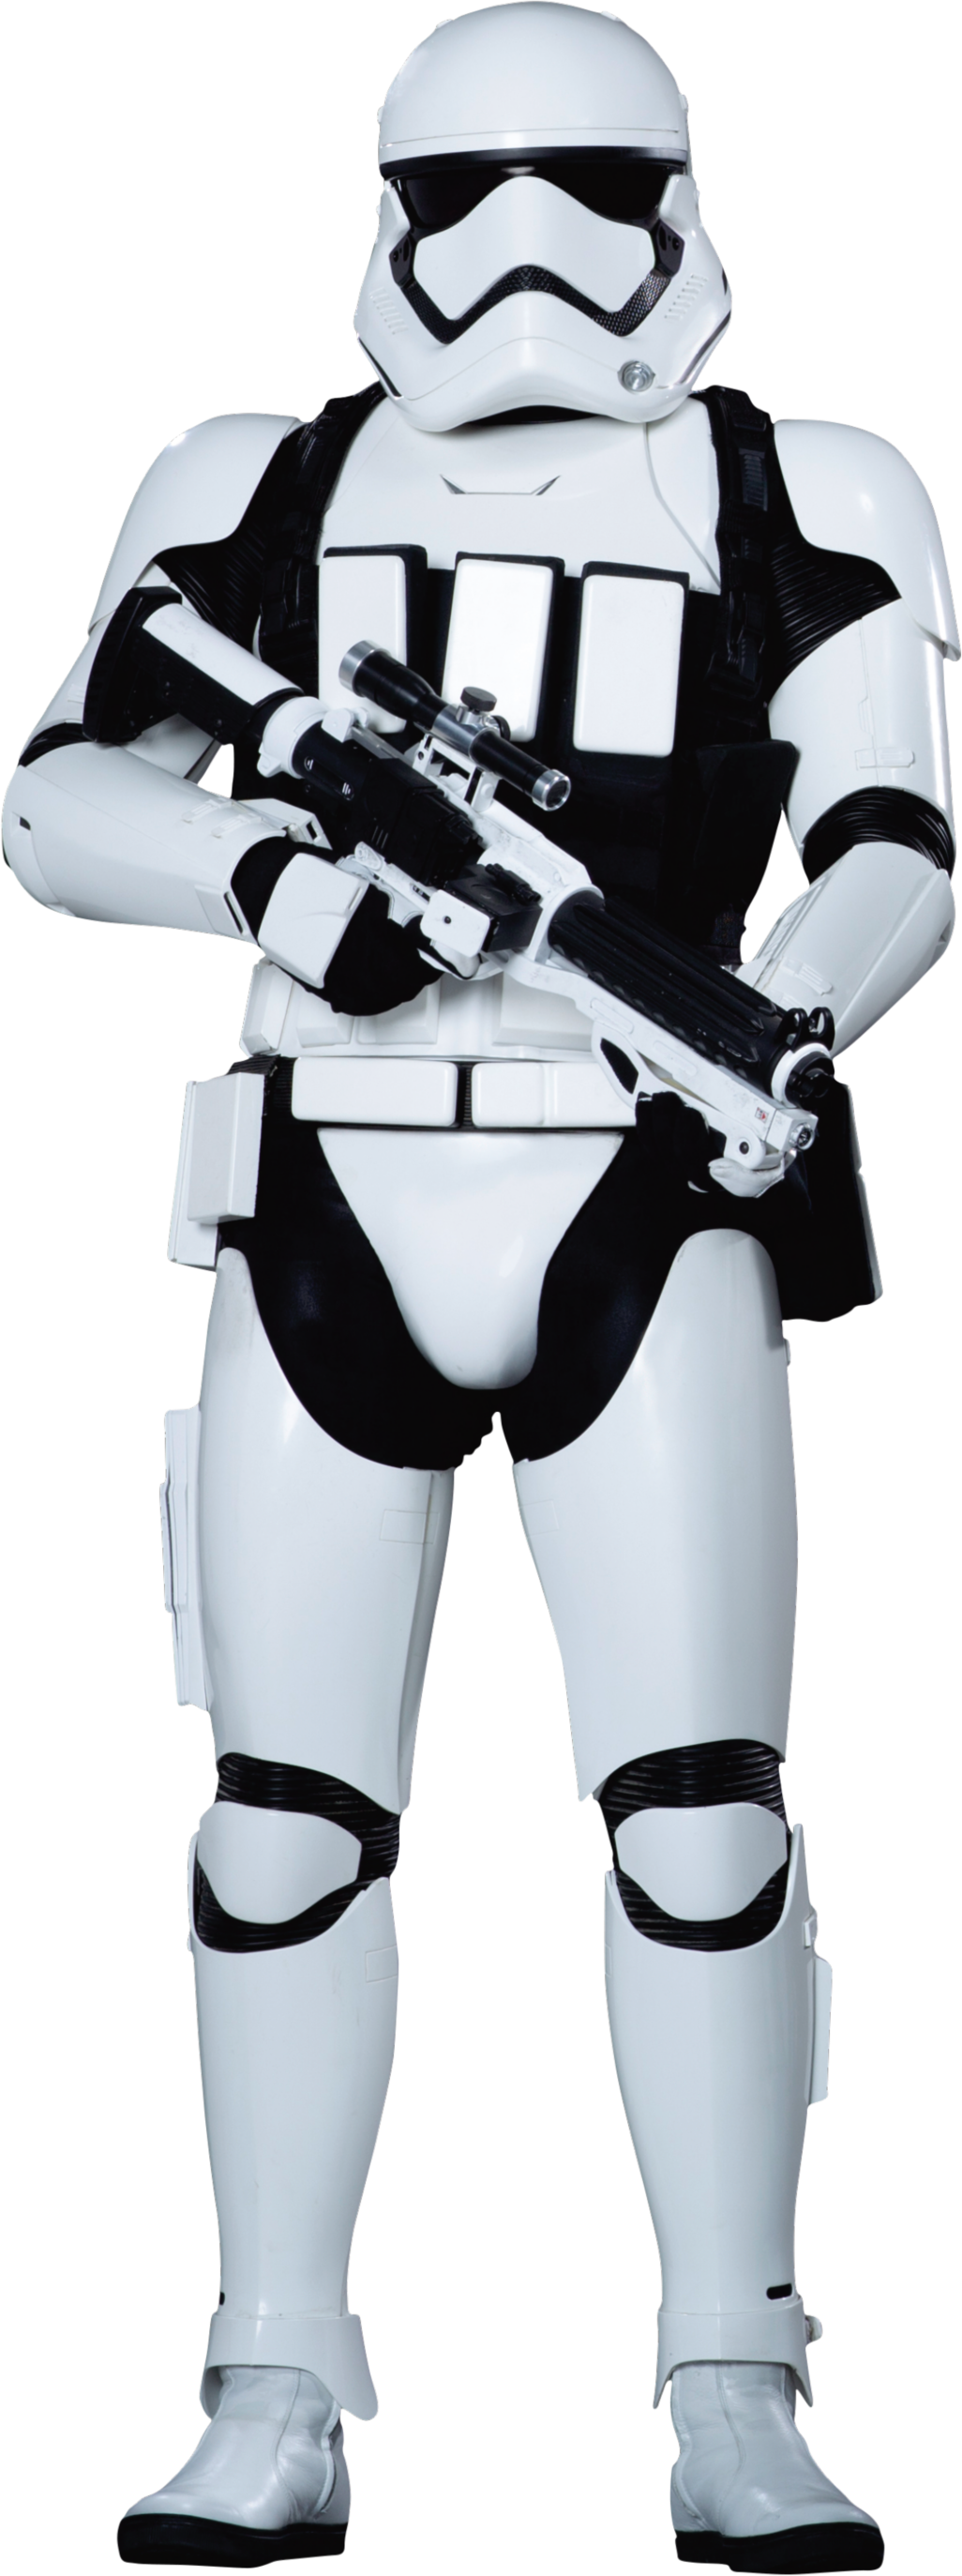 stormtrooper star wars the force awakens characters #26028